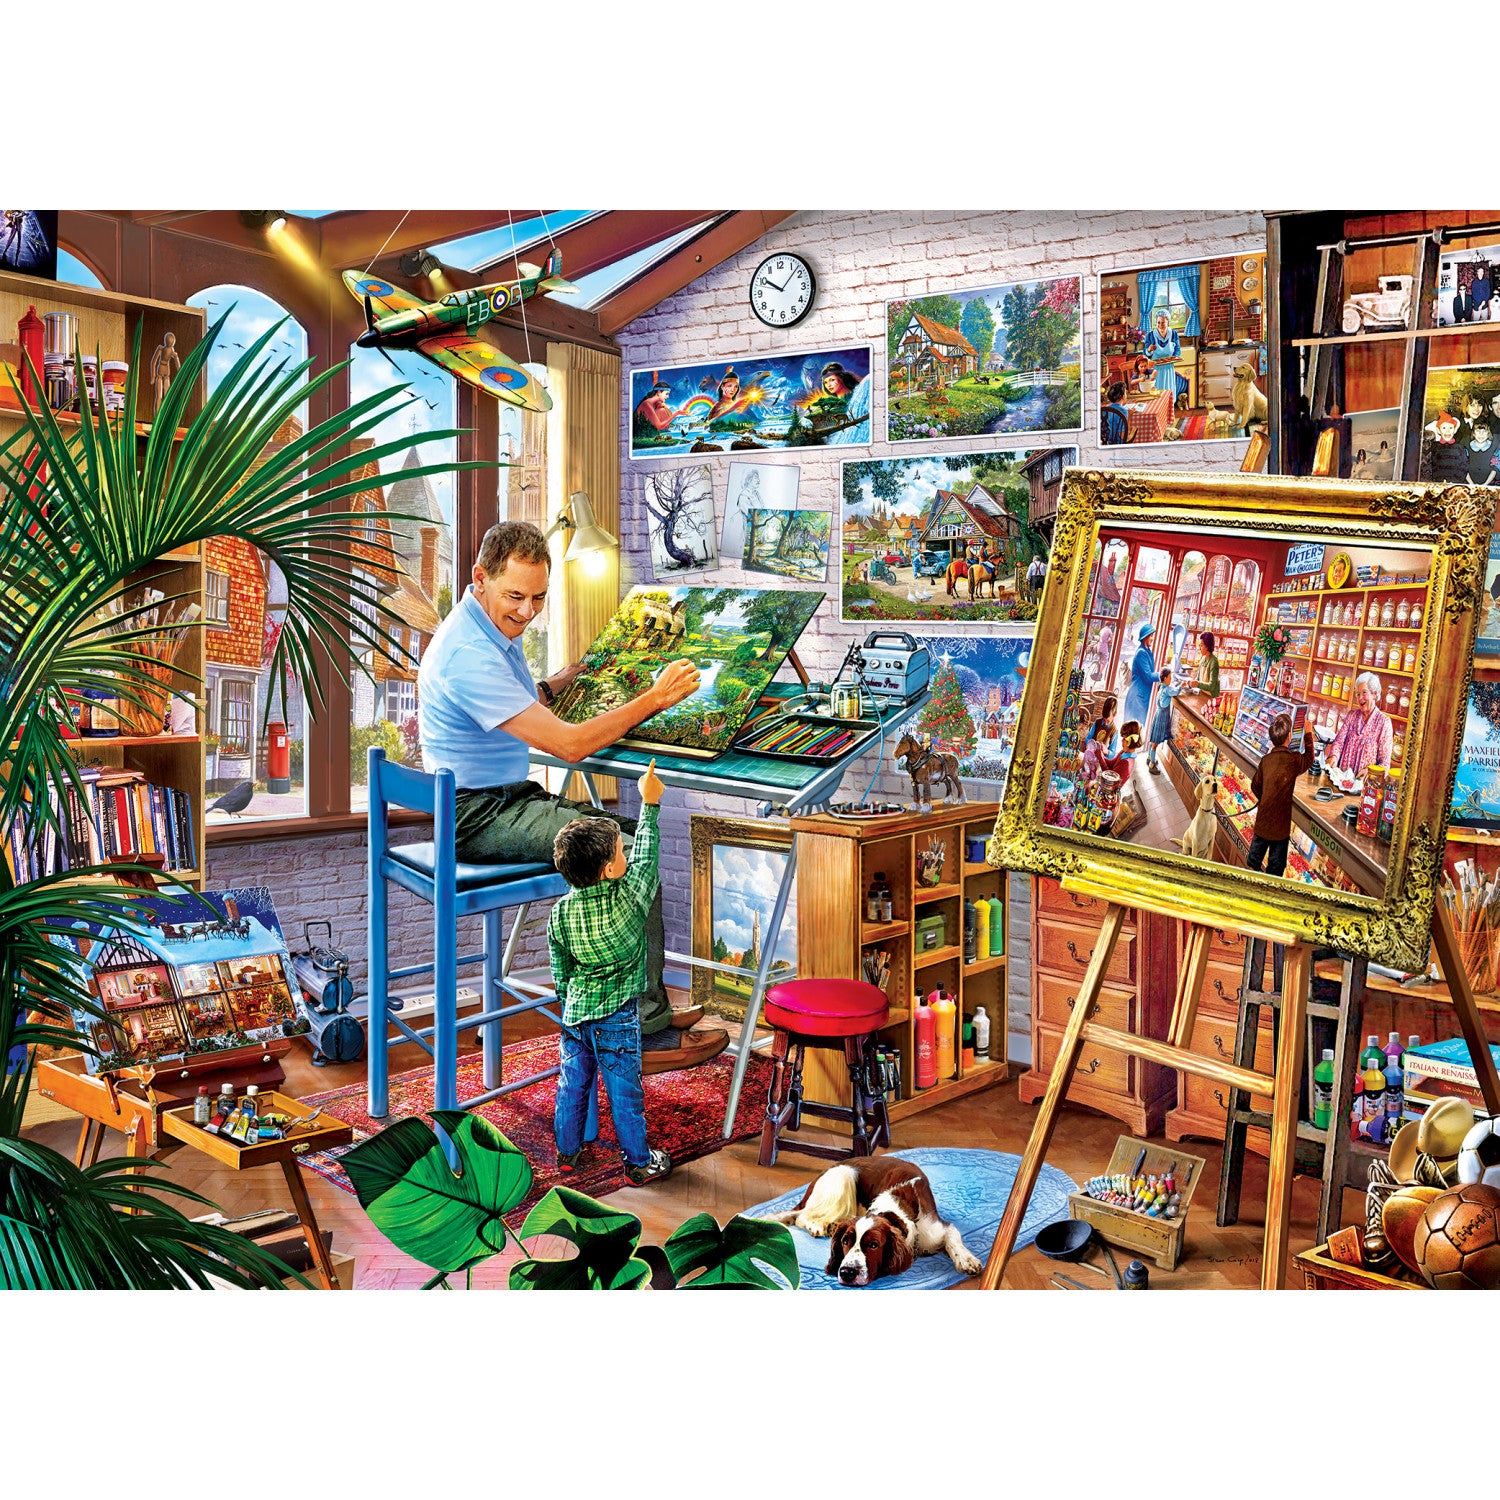 MasterPiece Gallery - Gallery on the Square 1000 Piece Puzzle